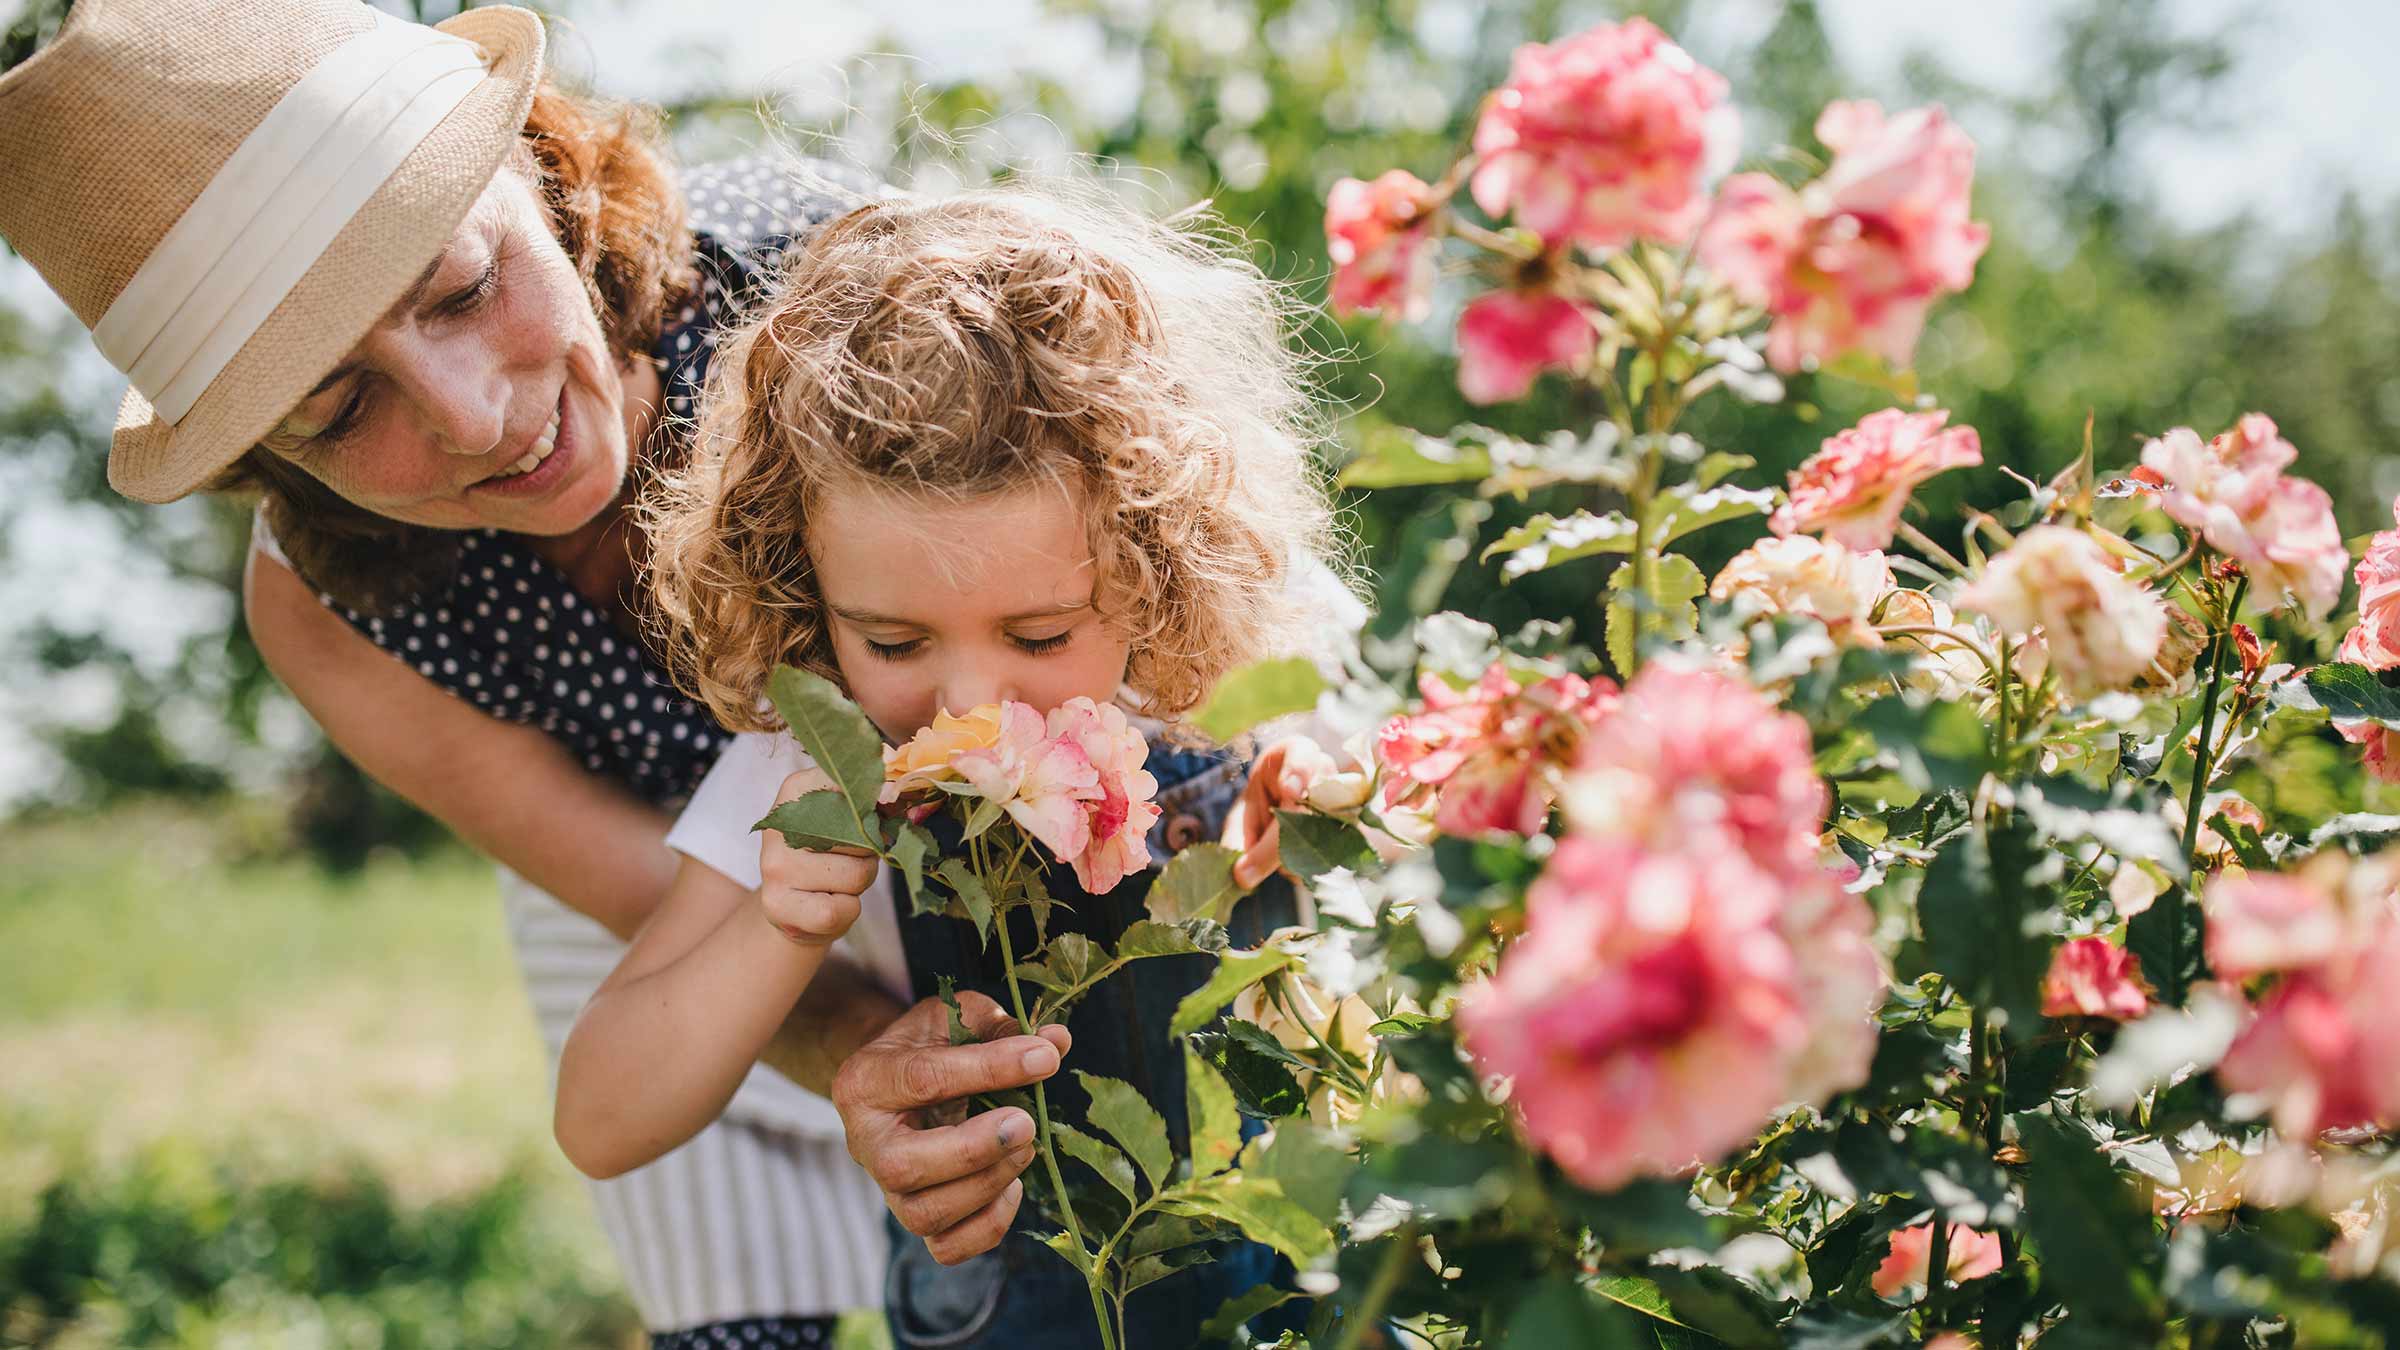 An older woman and her granddaughter smelling roses in a garden